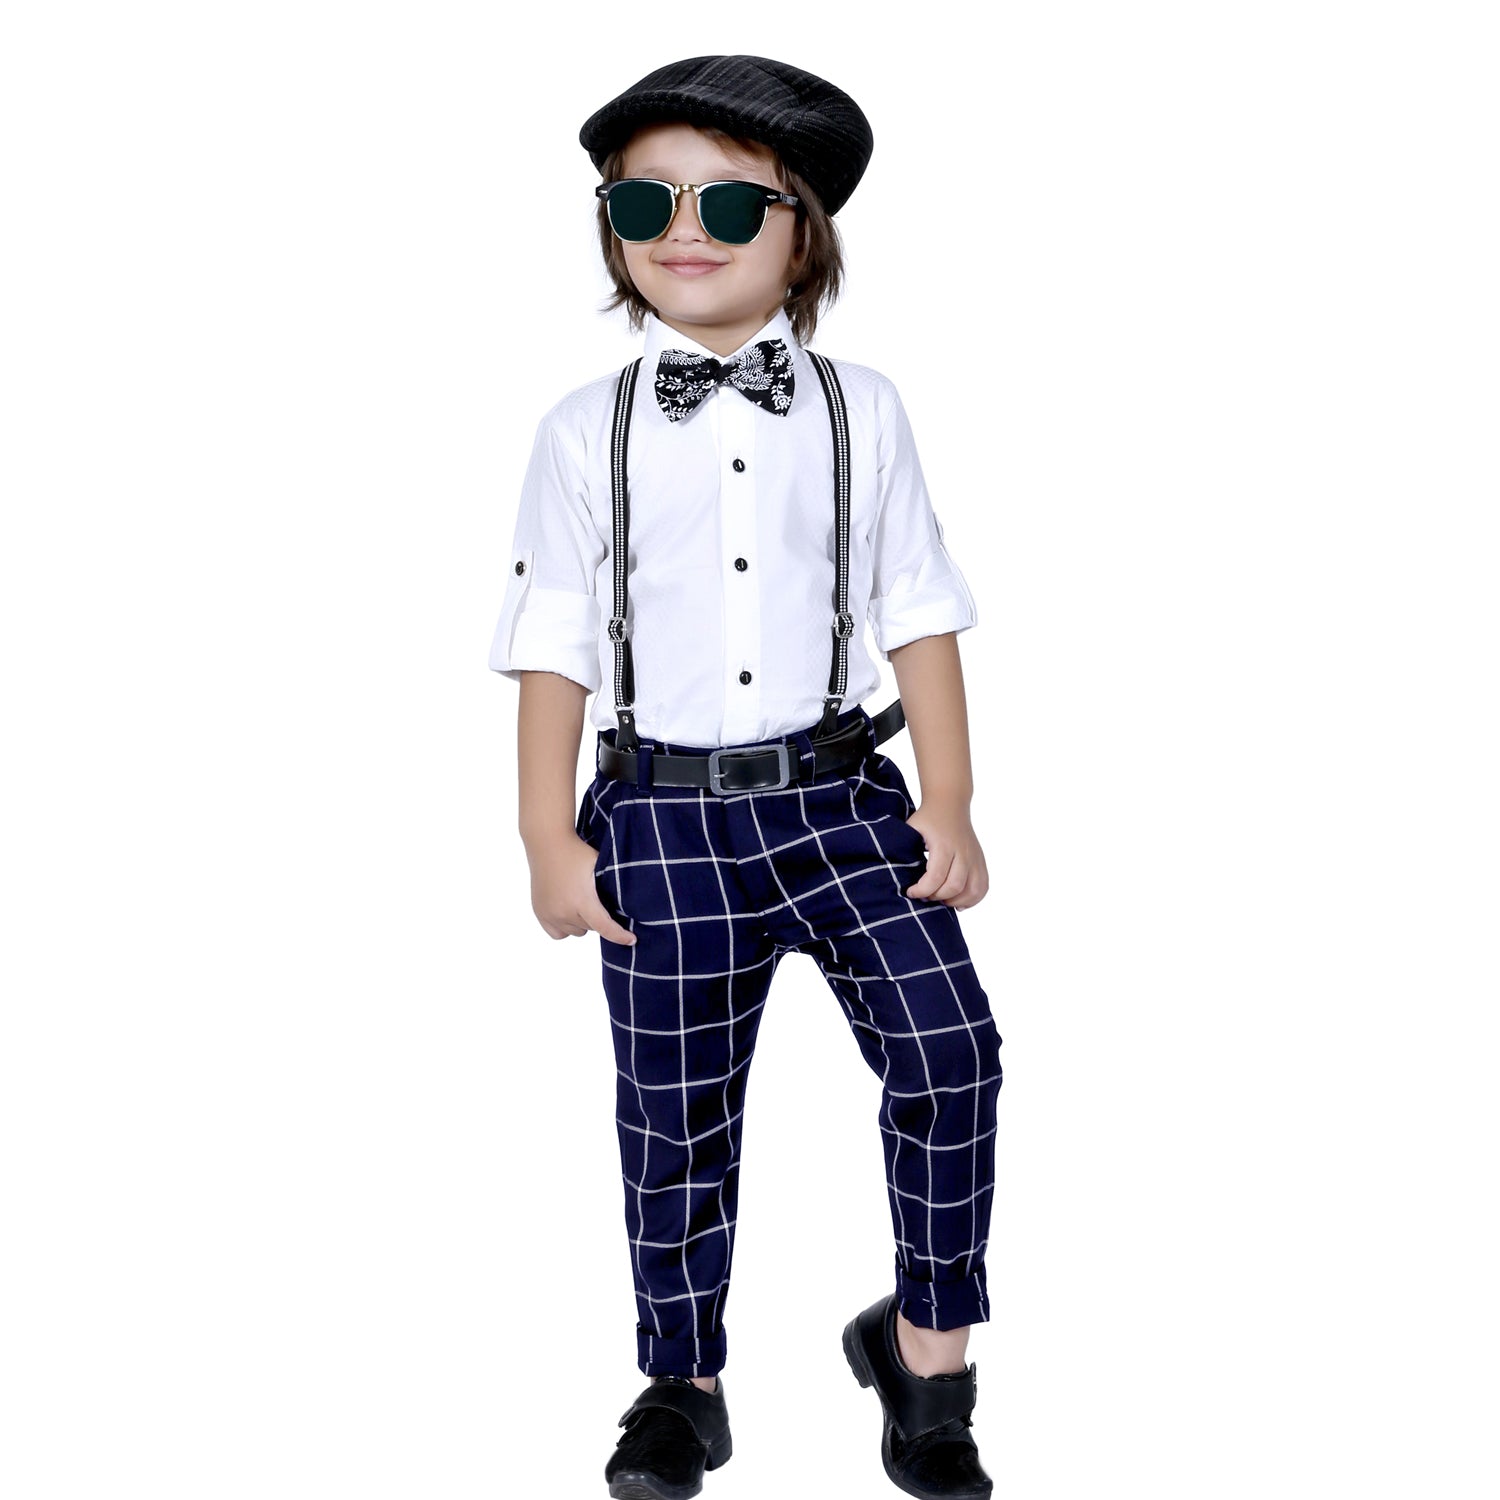 Plaid Party wear outfit with suspenders and bow tie. - mashup boys